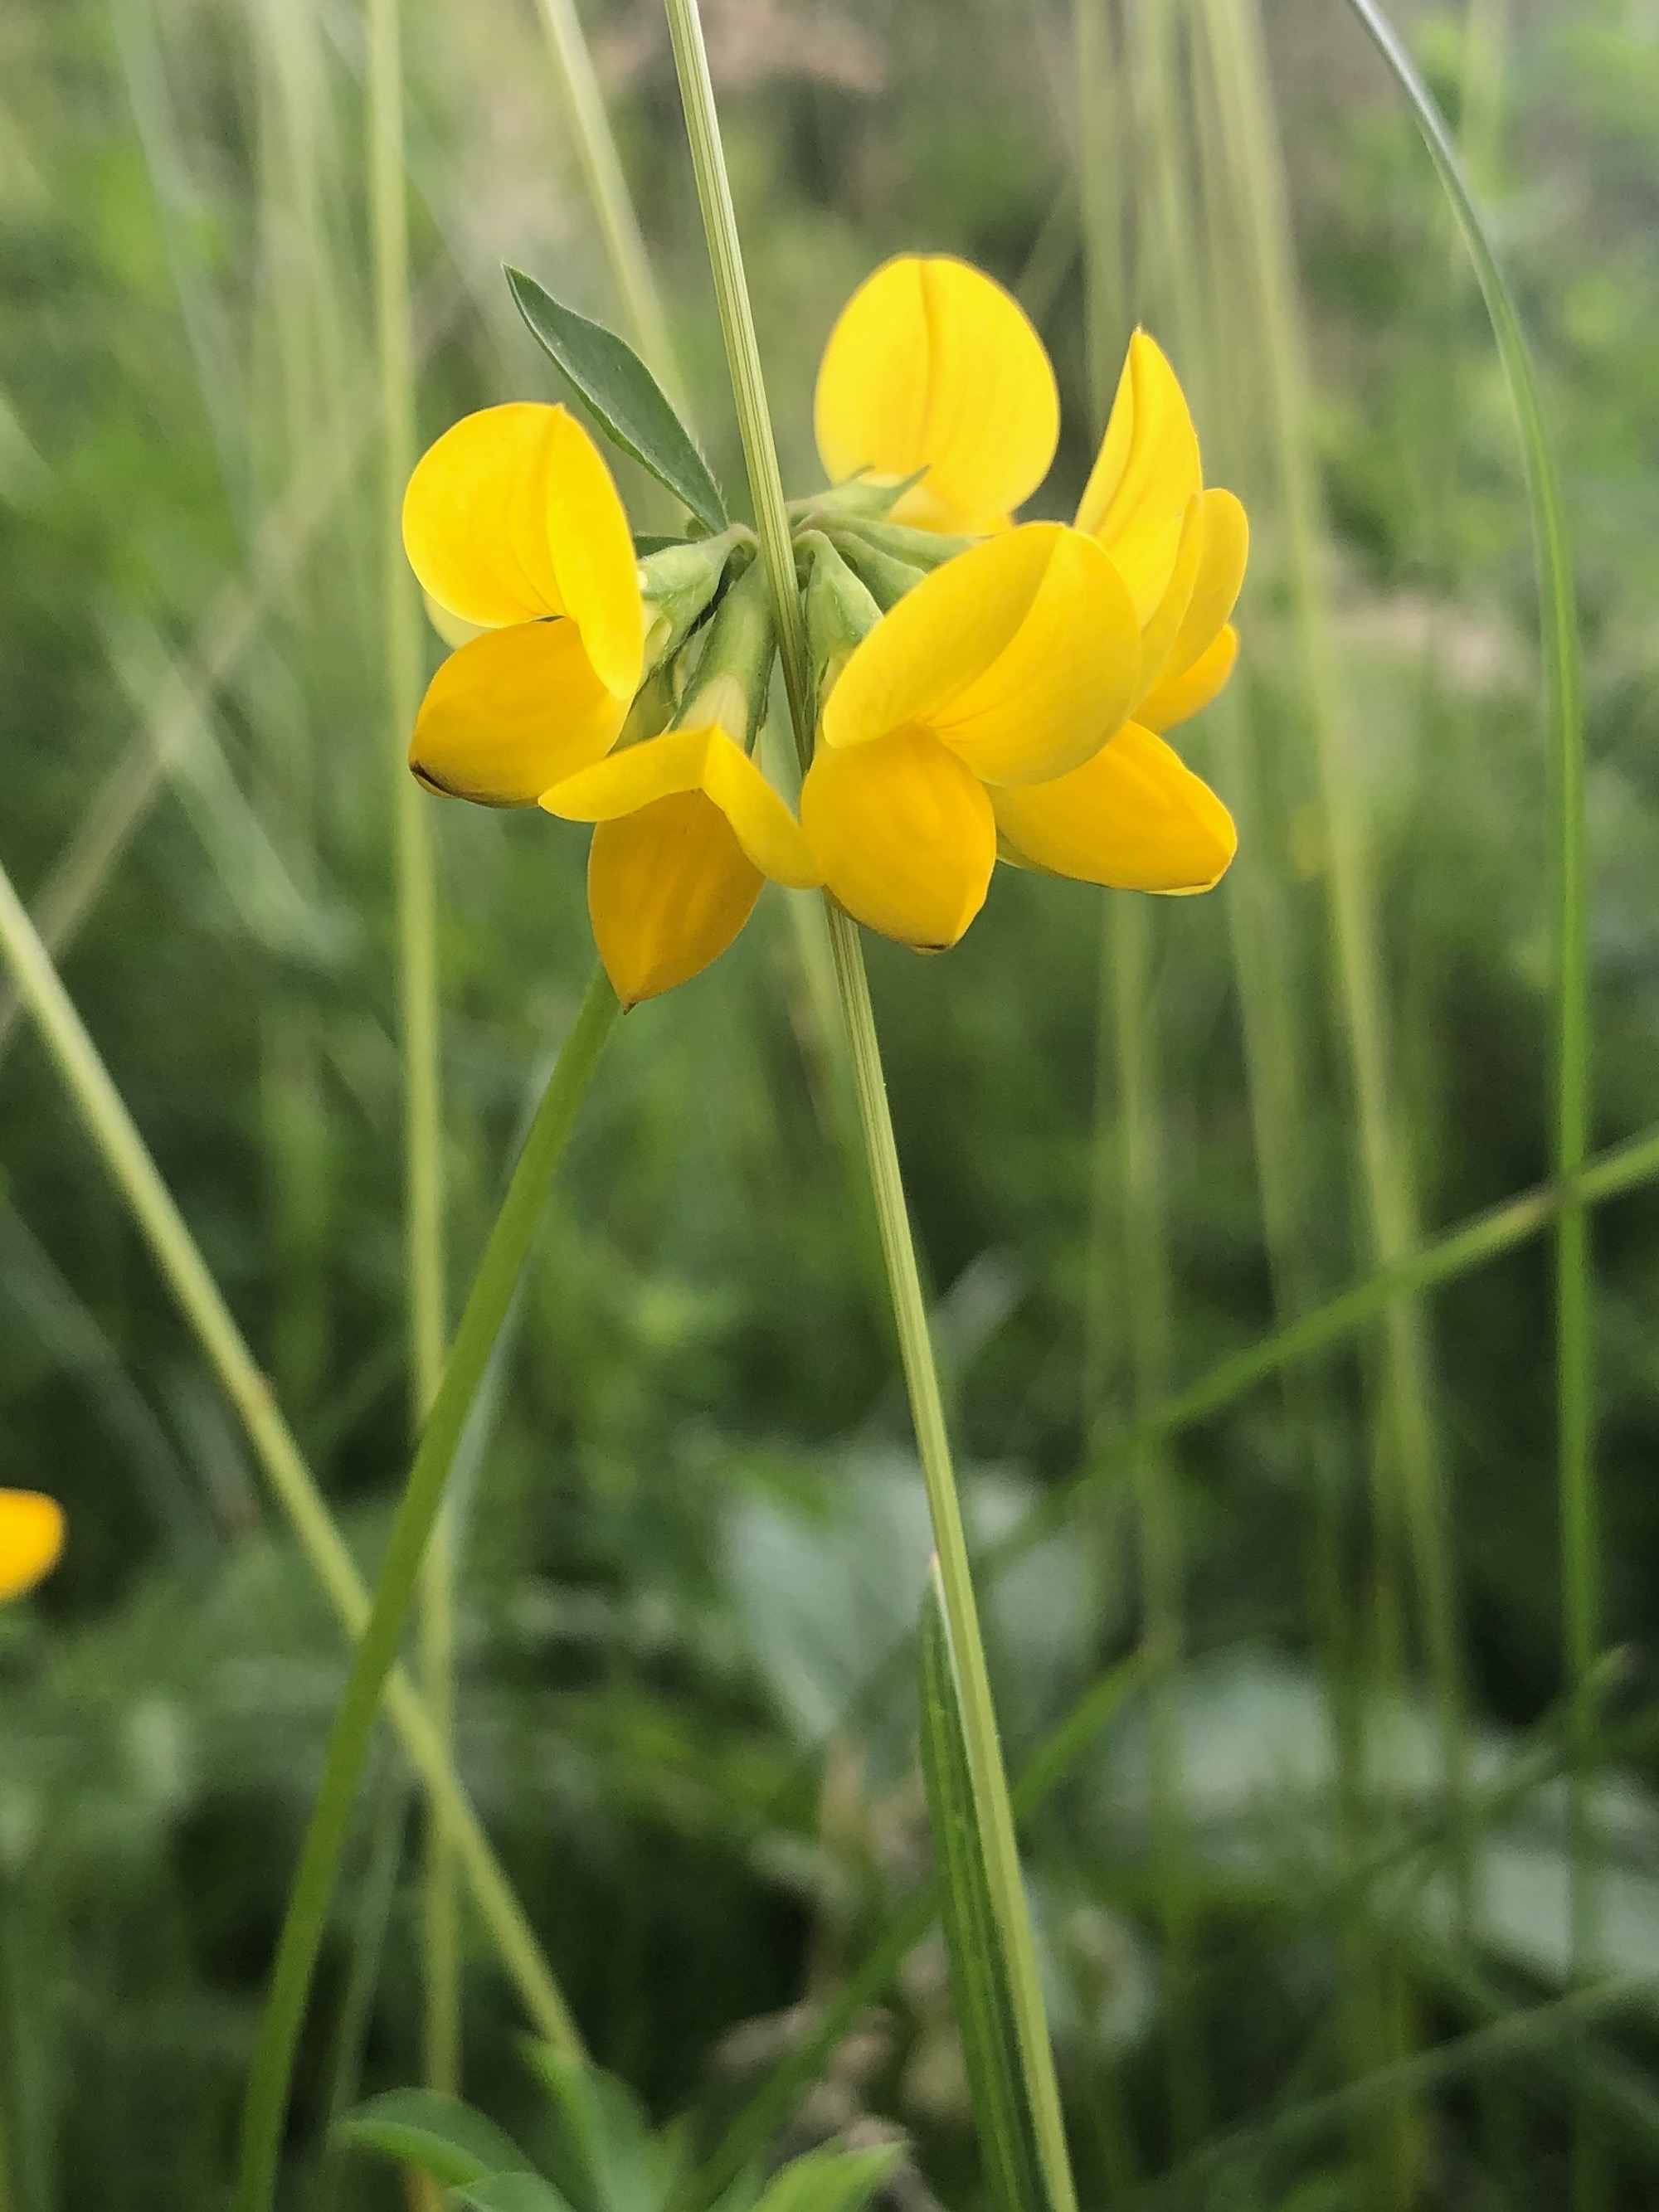 Bird's-foot Trefoil by Duck Pond Parking Lot in Madison, Wisconsin on June 7, 2020.